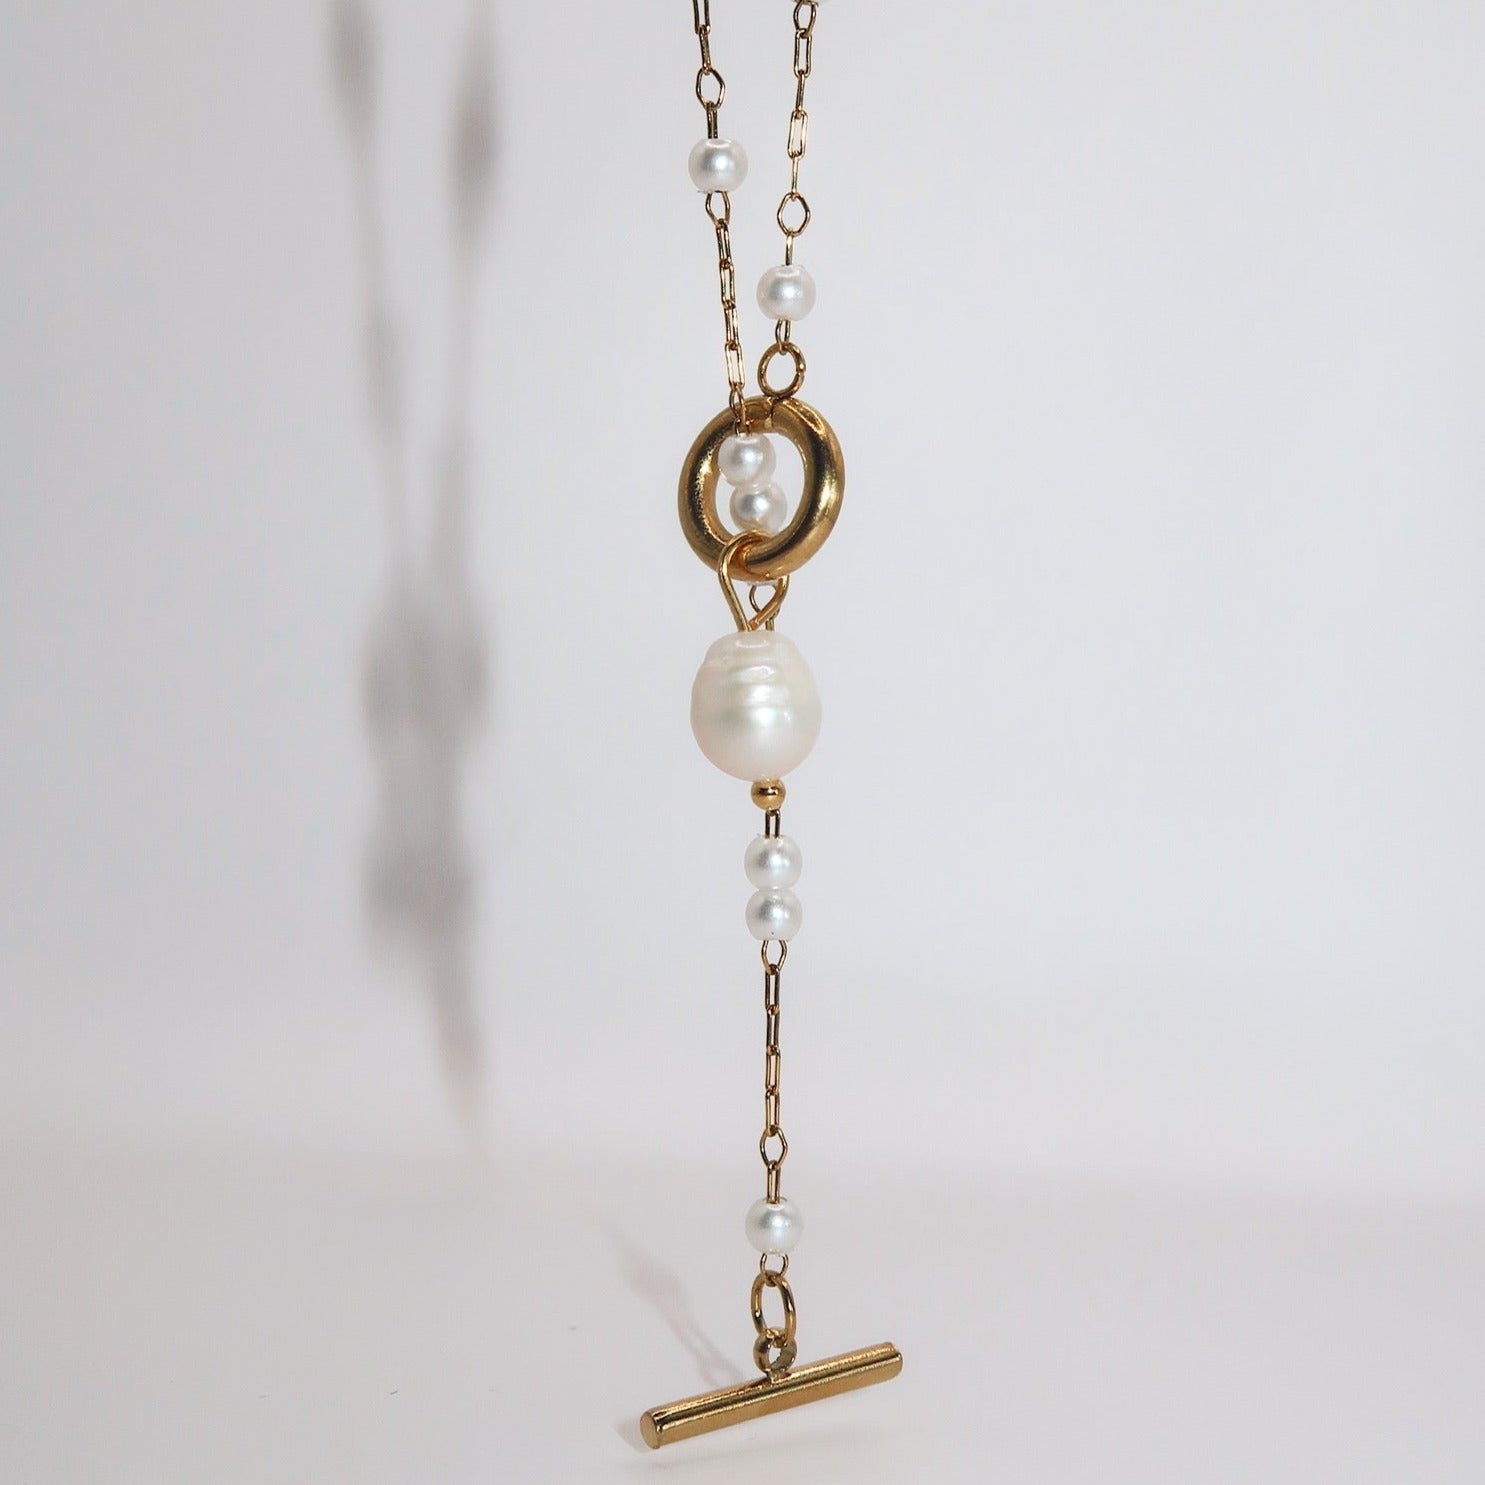 MORGAN - 18K PVD Gold Plated Necklace with Freshwater Pearls - Mixed Metals